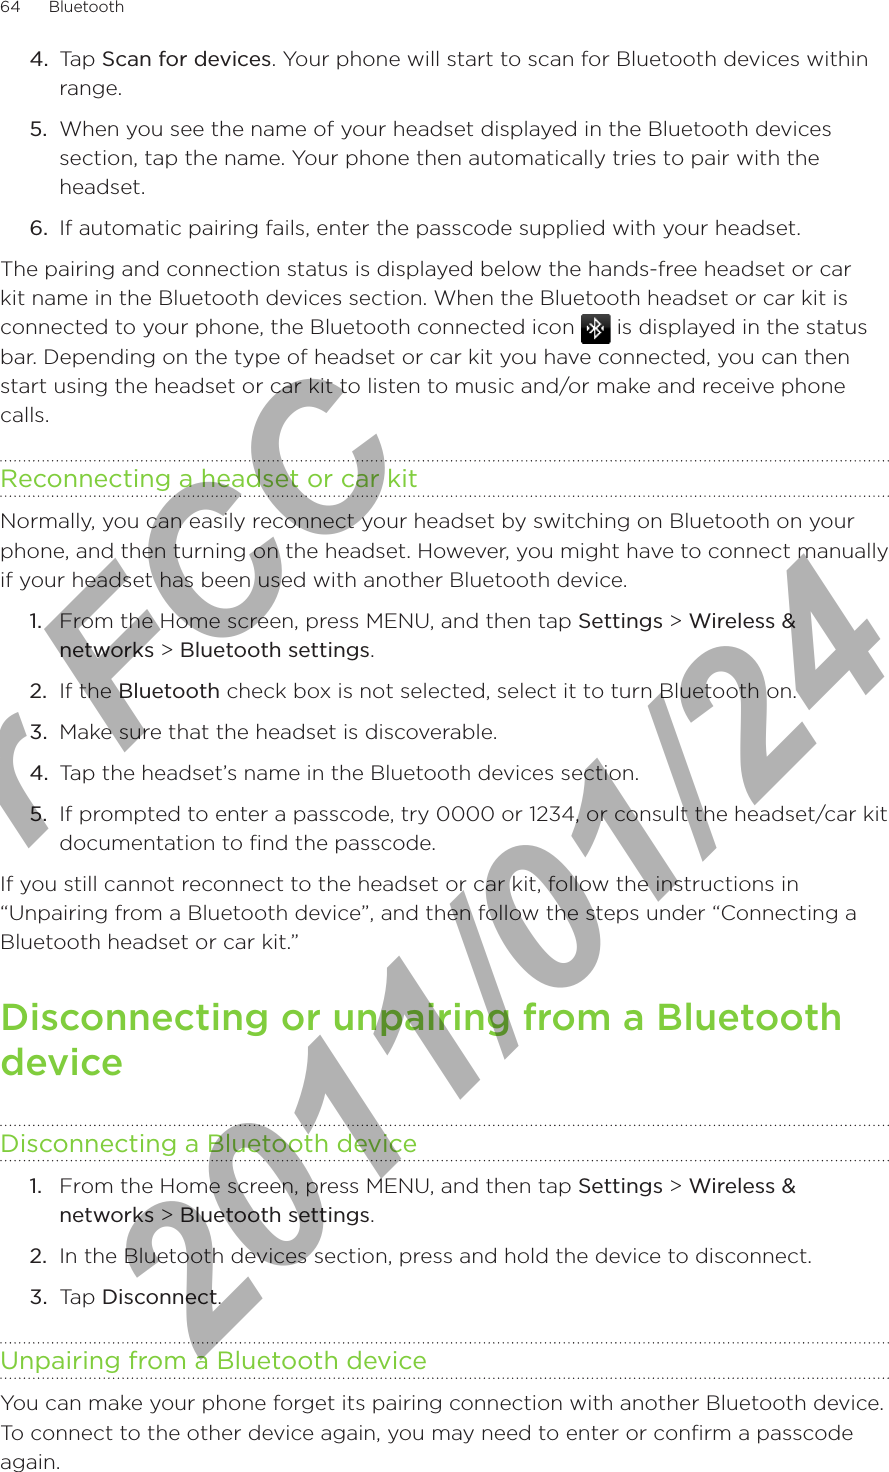 64      Bluetooth      4.  Tap Scan for devices. Your phone will start to scan for Bluetooth devices within range.5.  When you see the name of your headset displayed in the Bluetooth devices section, tap the name. Your phone then automatically tries to pair with the headset.6.  If automatic pairing fails, enter the passcode supplied with your headset.The pairing and connection status is displayed below the hands-free headset or car kit name in the Bluetooth devices section. When the Bluetooth headset or car kit is connected to your phone, the Bluetooth connected icon   is displayed in the status bar. Depending on the type of headset or car kit you have connected, you can then start using the headset or car kit to listen to music and/or make and receive phone calls.Reconnecting a headset or car kitNormally, you can easily reconnect your headset by switching on Bluetooth on your phone, and then turning on the headset. However, you might have to connect manually if your headset has been used with another Bluetooth device.From the Home screen, press MENU, and then tap Settings &gt; Wireless &amp; networks &gt; Bluetooth settings.If the Bluetooth check box is not selected, select it to turn Bluetooth on.Make sure that the headset is discoverable.Tap the headset’s name in the Bluetooth devices section.If prompted to enter a passcode, try 0000 or 1234, or consult the headset/car kit documentation to find the passcode.If you still cannot reconnect to the headset or car kit, follow the instructions in “Unpairing from a Bluetooth device”, and then follow the steps under “Connecting a Bluetooth headset or car kit.”Disconnecting or unpairing from a Bluetooth deviceDisconnecting a Bluetooth deviceFrom the Home screen, press MENU, and then tap Settings &gt; Wireless &amp; networks &gt; Bluetooth settings.In the Bluetooth devices section, press and hold the device to disconnect.Tap Disconnect.Unpairing from a Bluetooth deviceYou can make your phone forget its pairing connection with another Bluetooth device.  To connect to the other device again, you may need to enter or confirm a passcode again.1.2.3.4.5.1.2.3.For FCC  2011/01/24